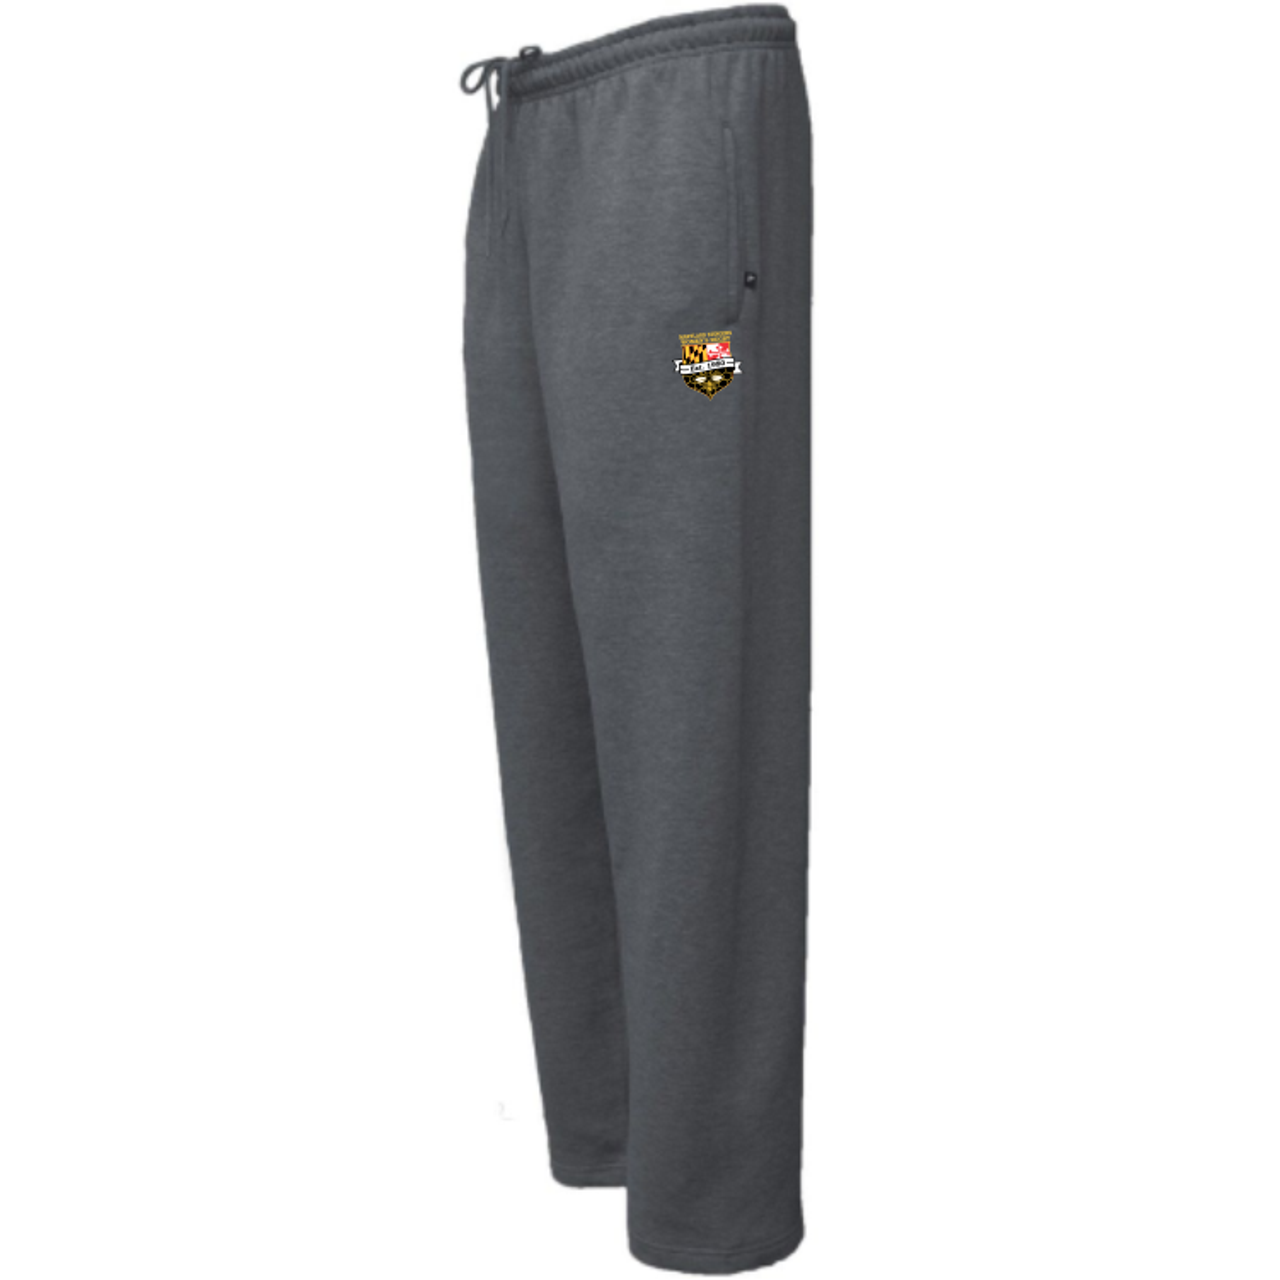 Stingers Rugby Sweatpant, Charcoal